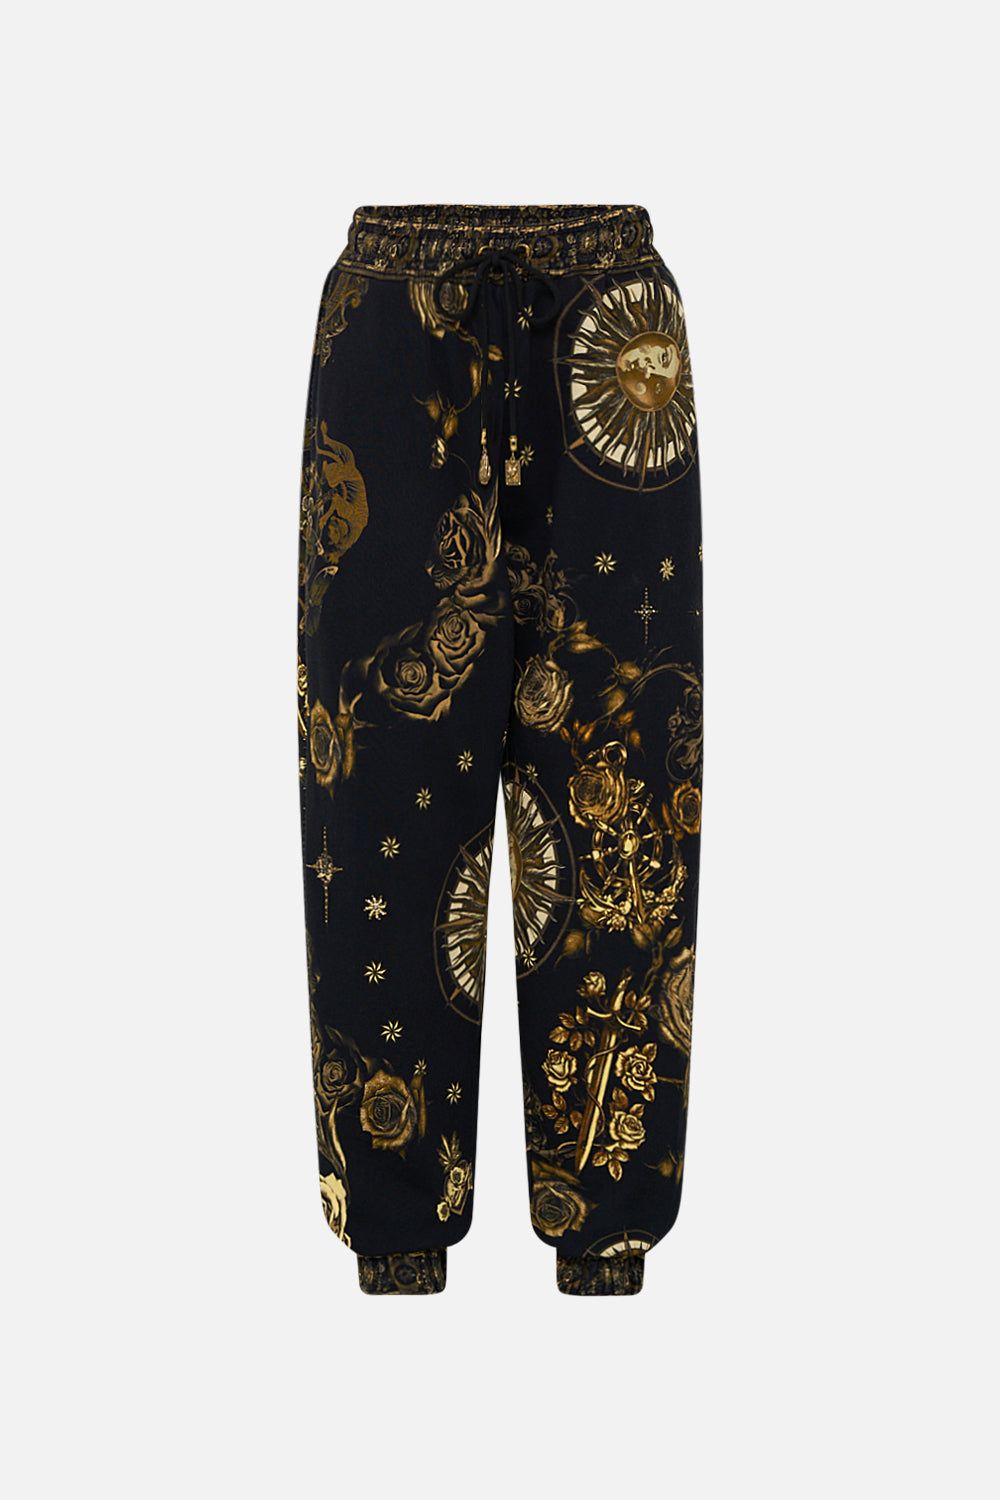 CAMILLA black jersey track pant in So Says The Oracle print.